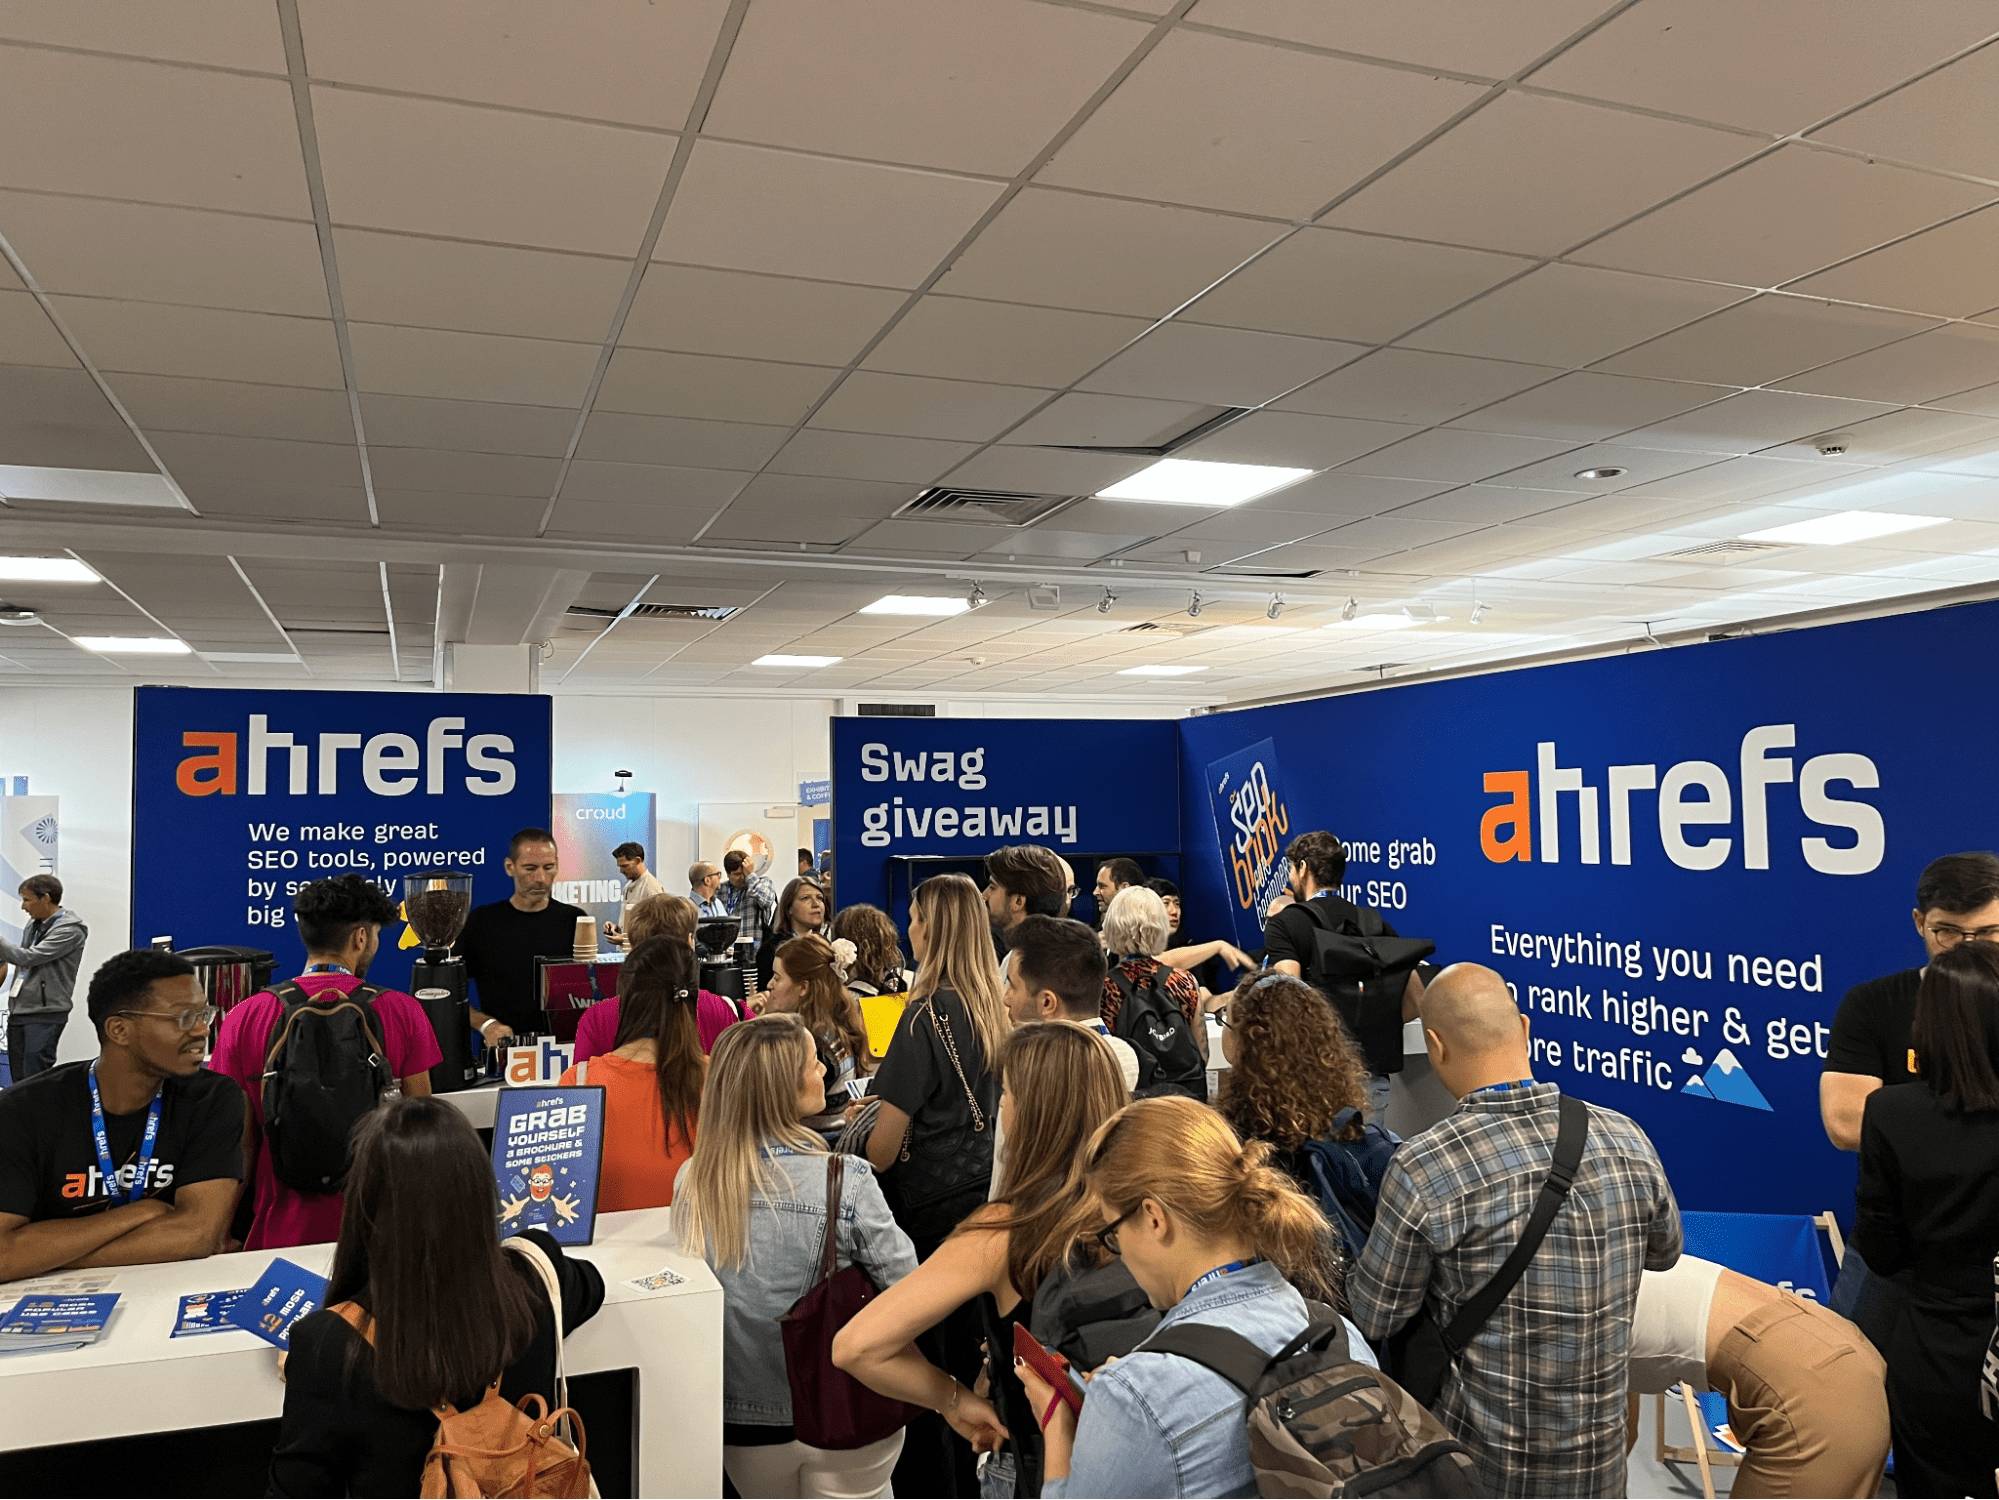 Busy crowds at Ahrefs' exhibitor stand
